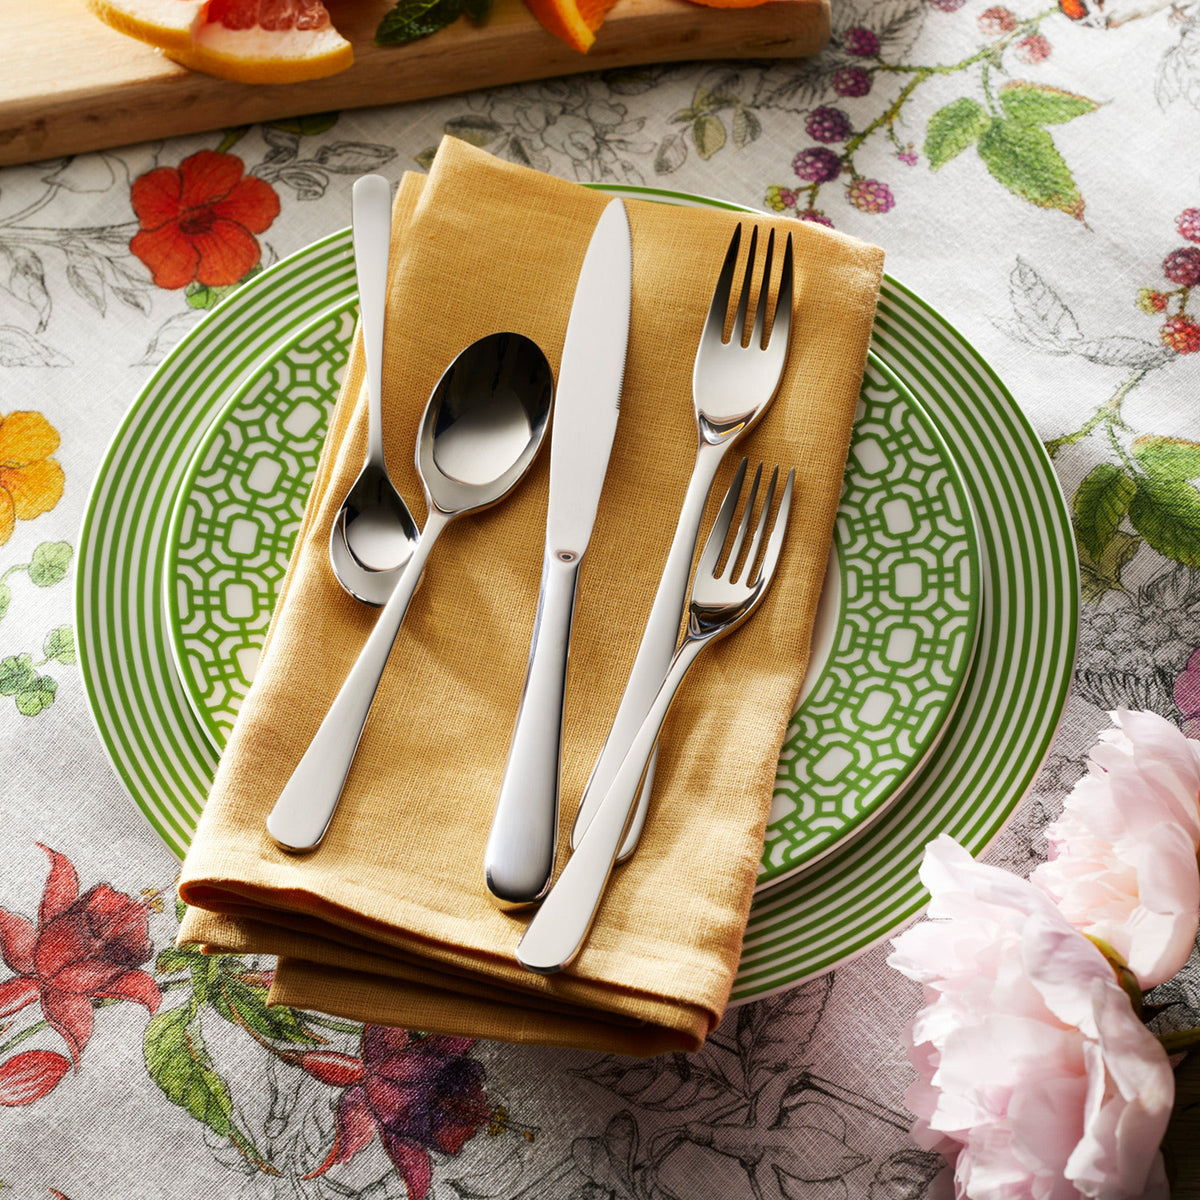 A Degrenne La Mer 5-Piece Flatware Setting, a lightweight plate with contemporary design, featuring silverware.